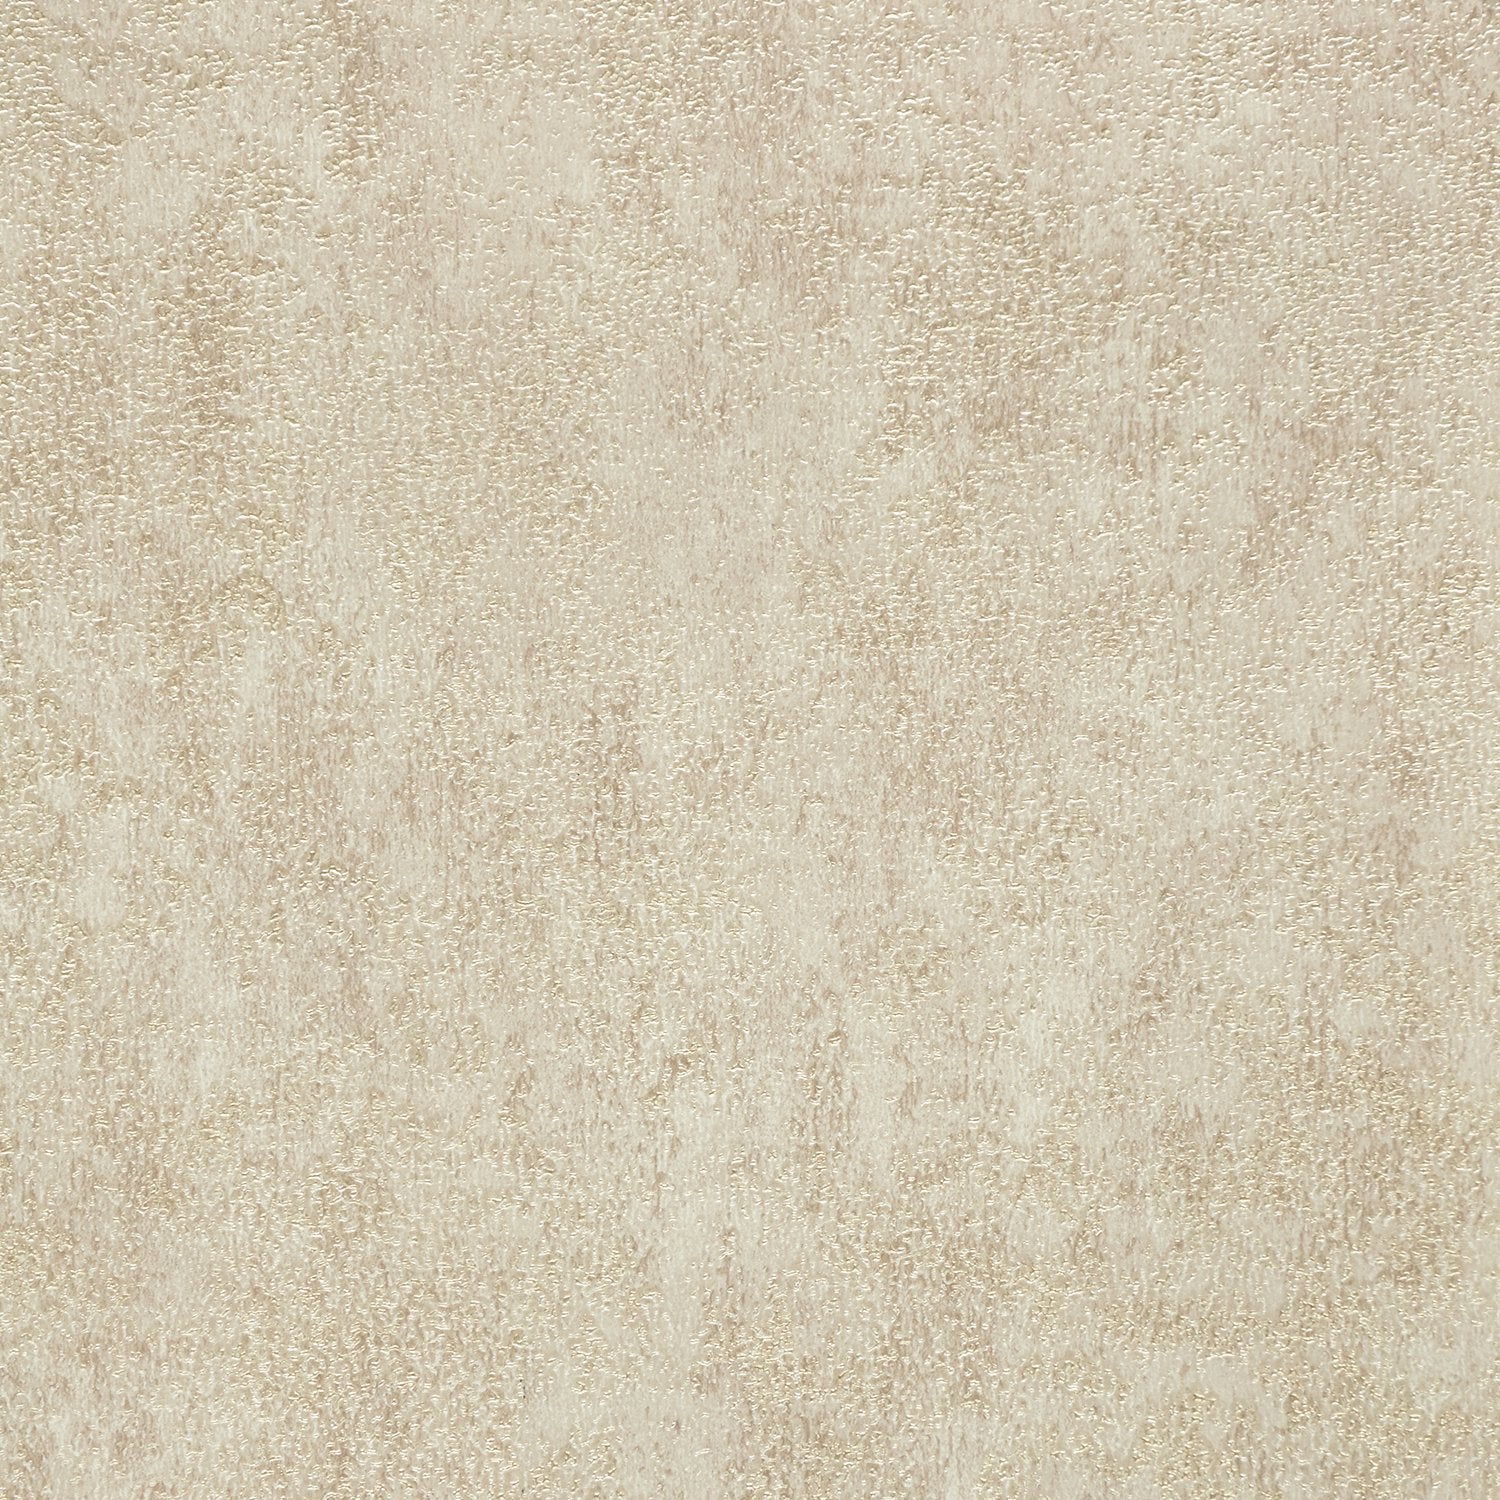 Patina Stone - Y47490 - Wallcovering - Vycon - Kube Contract